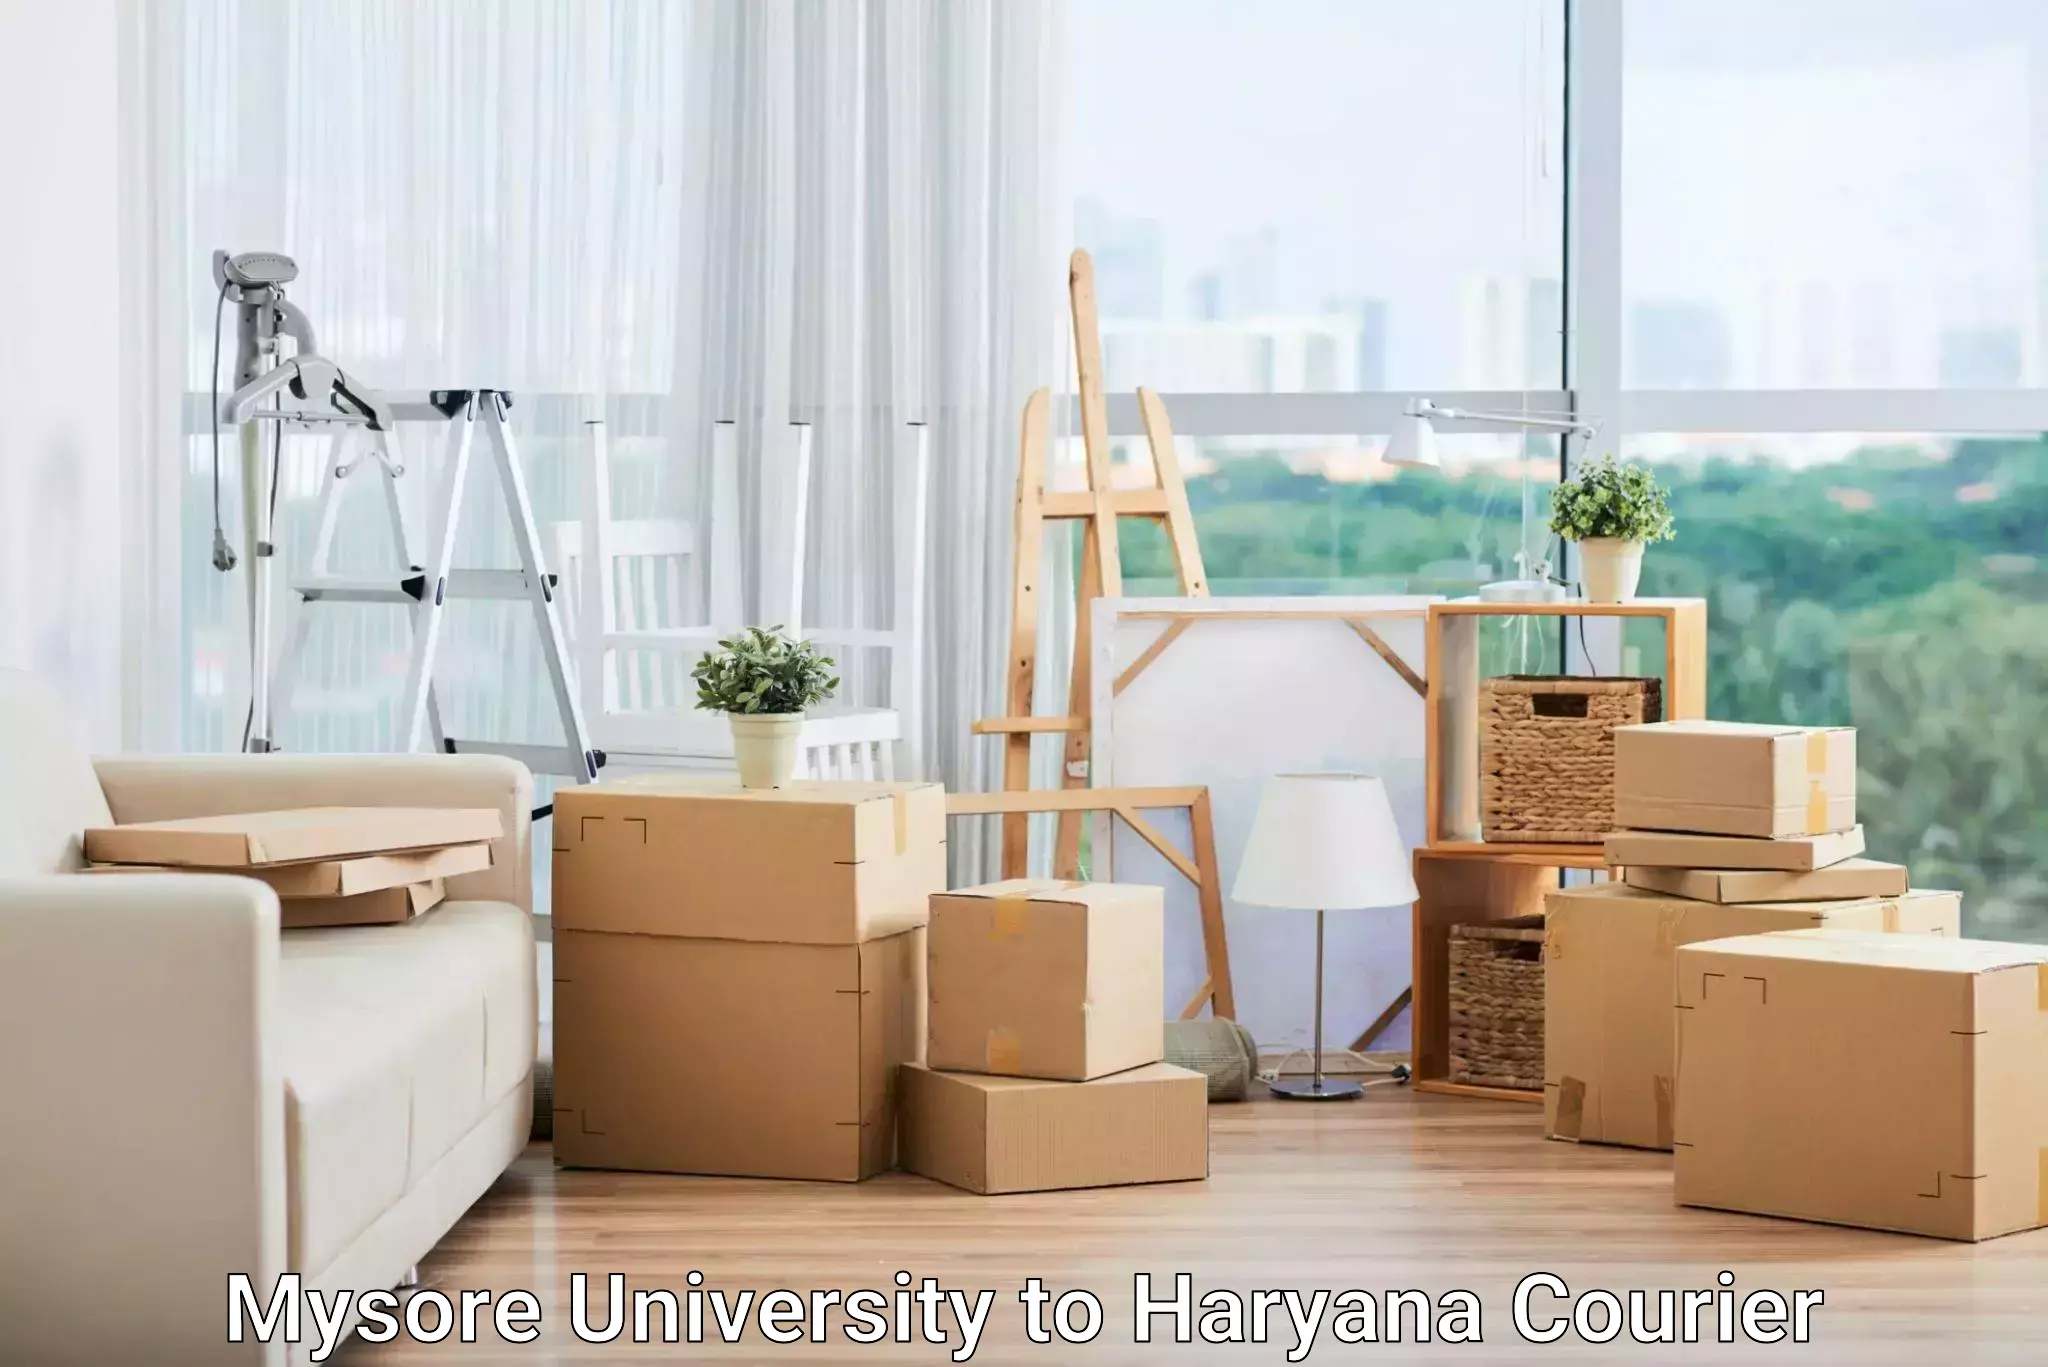 Express courier facilities in Mysore University to Bhuna